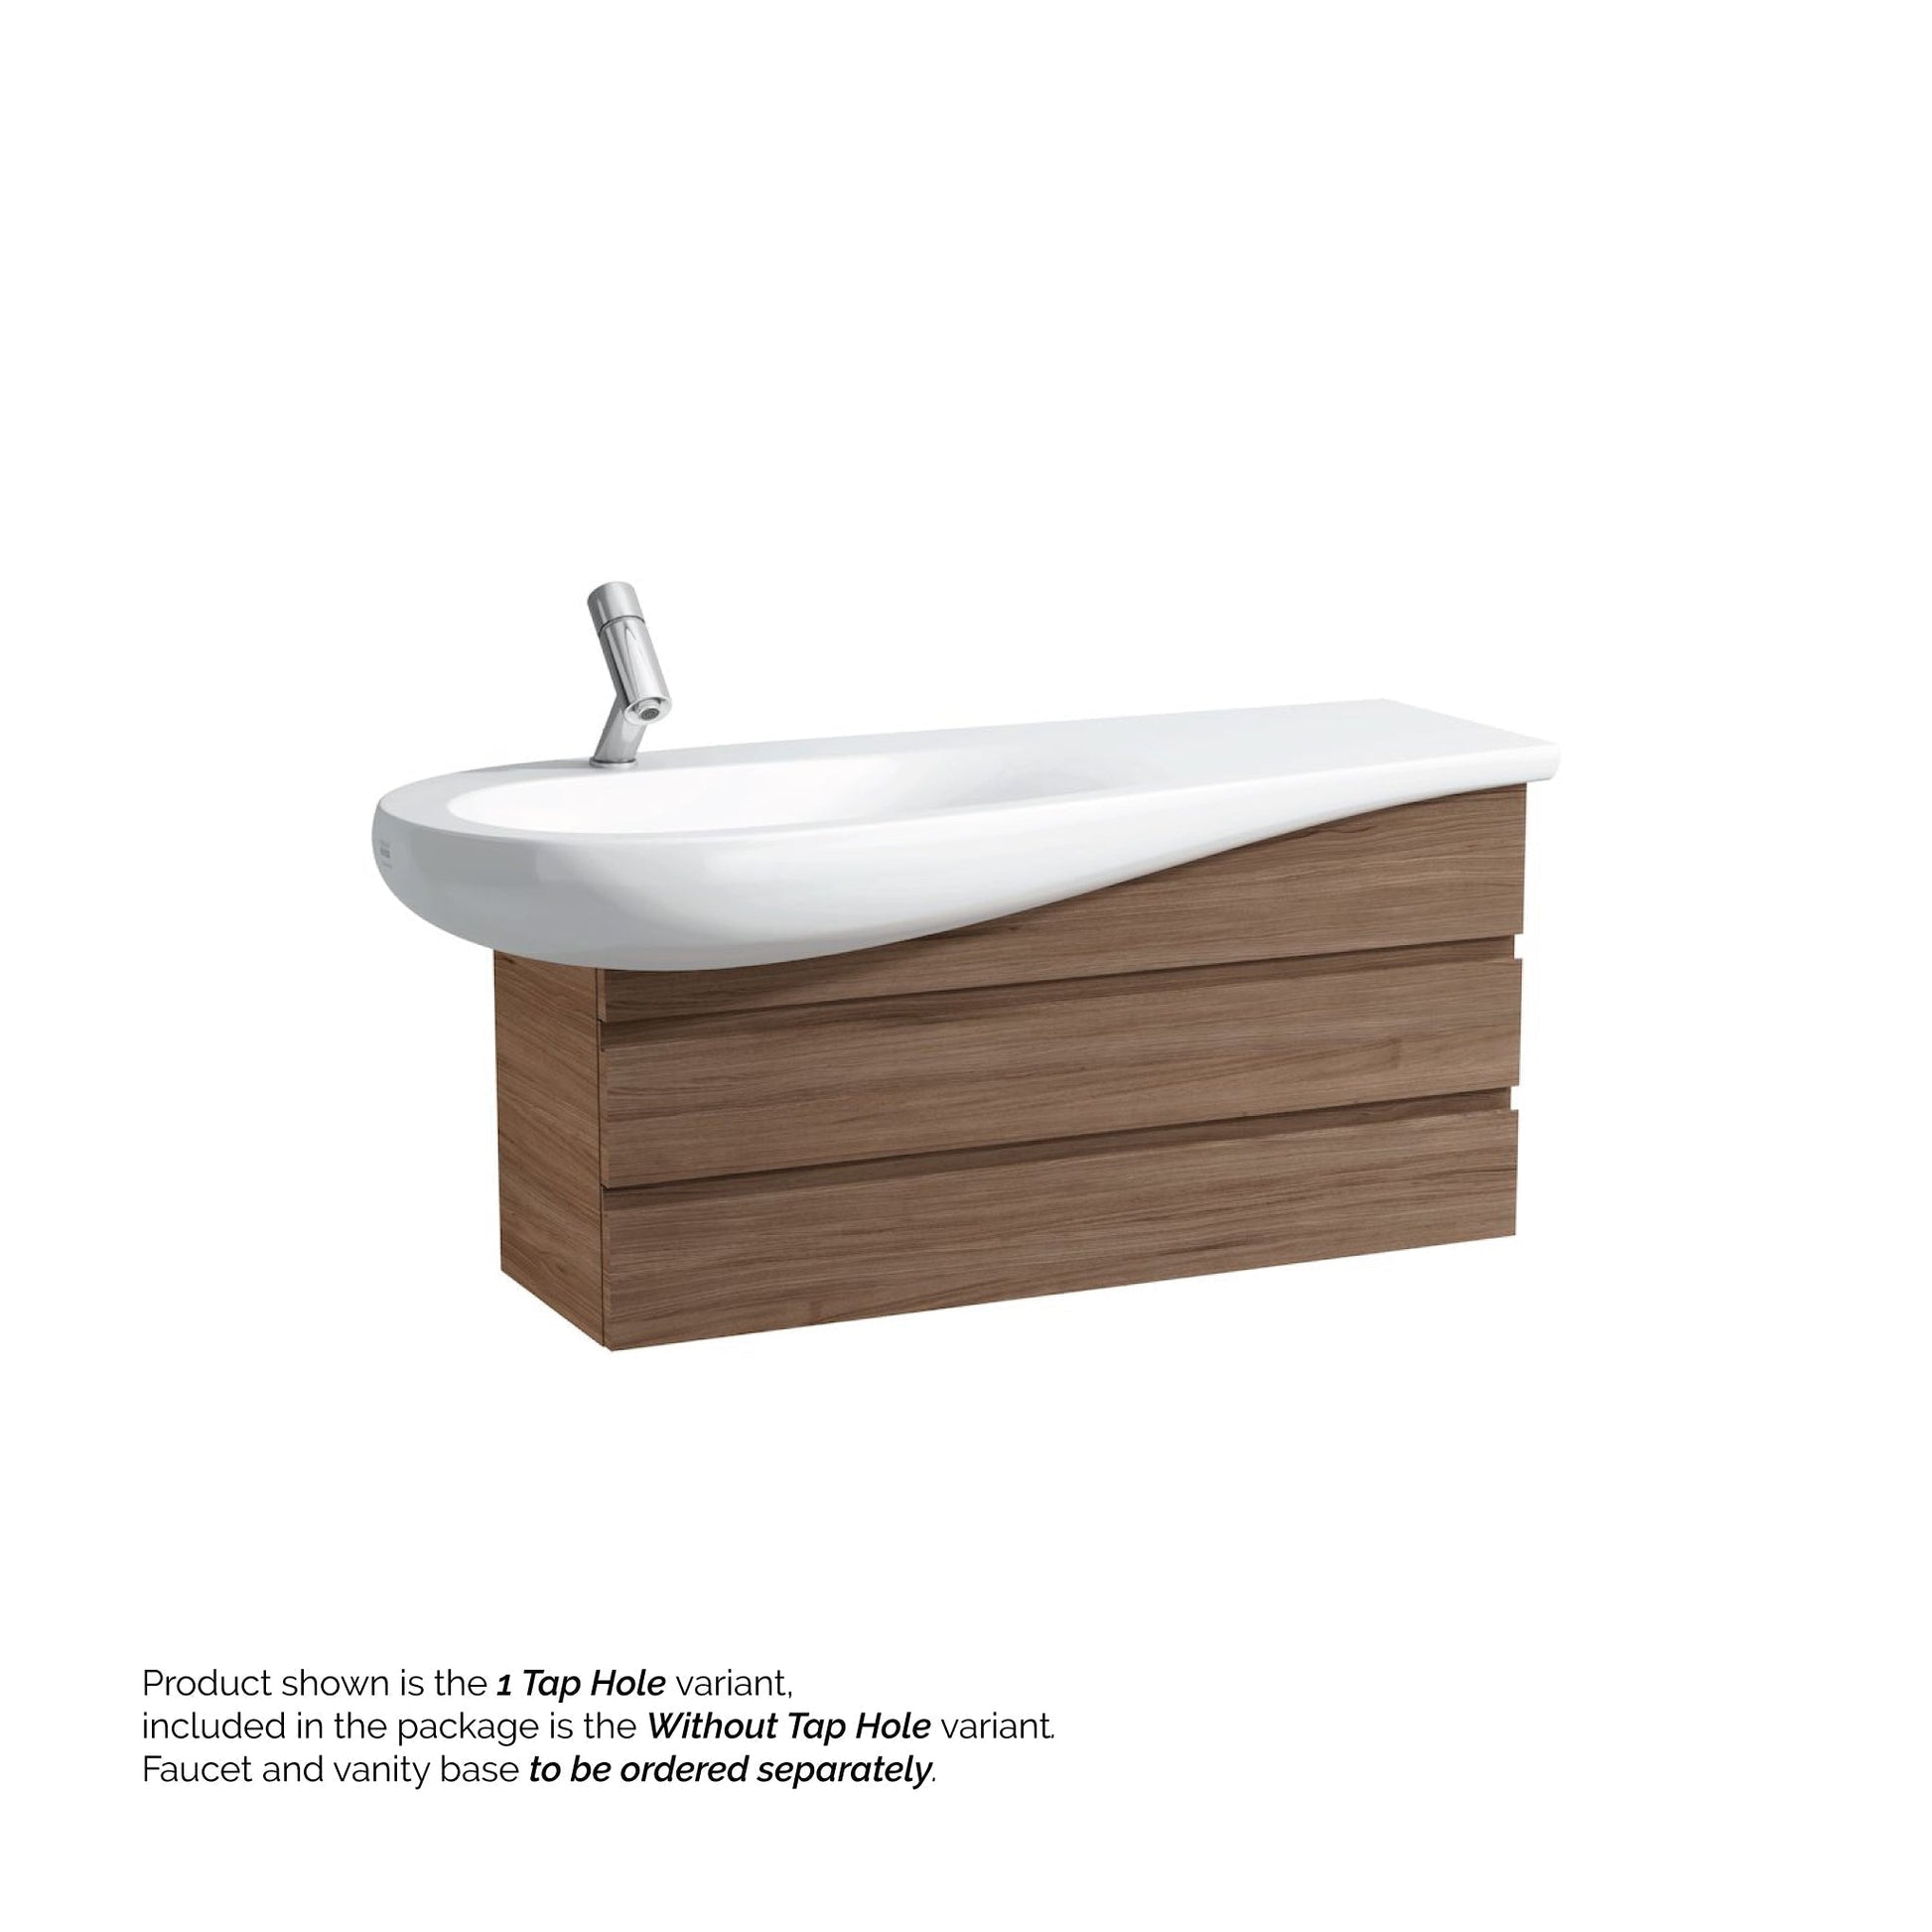 Laufen IlBagnoAlessi 47" x 20" White Wall-Mounted Shelf-Right Bathroom Sink Without Faucet Hole